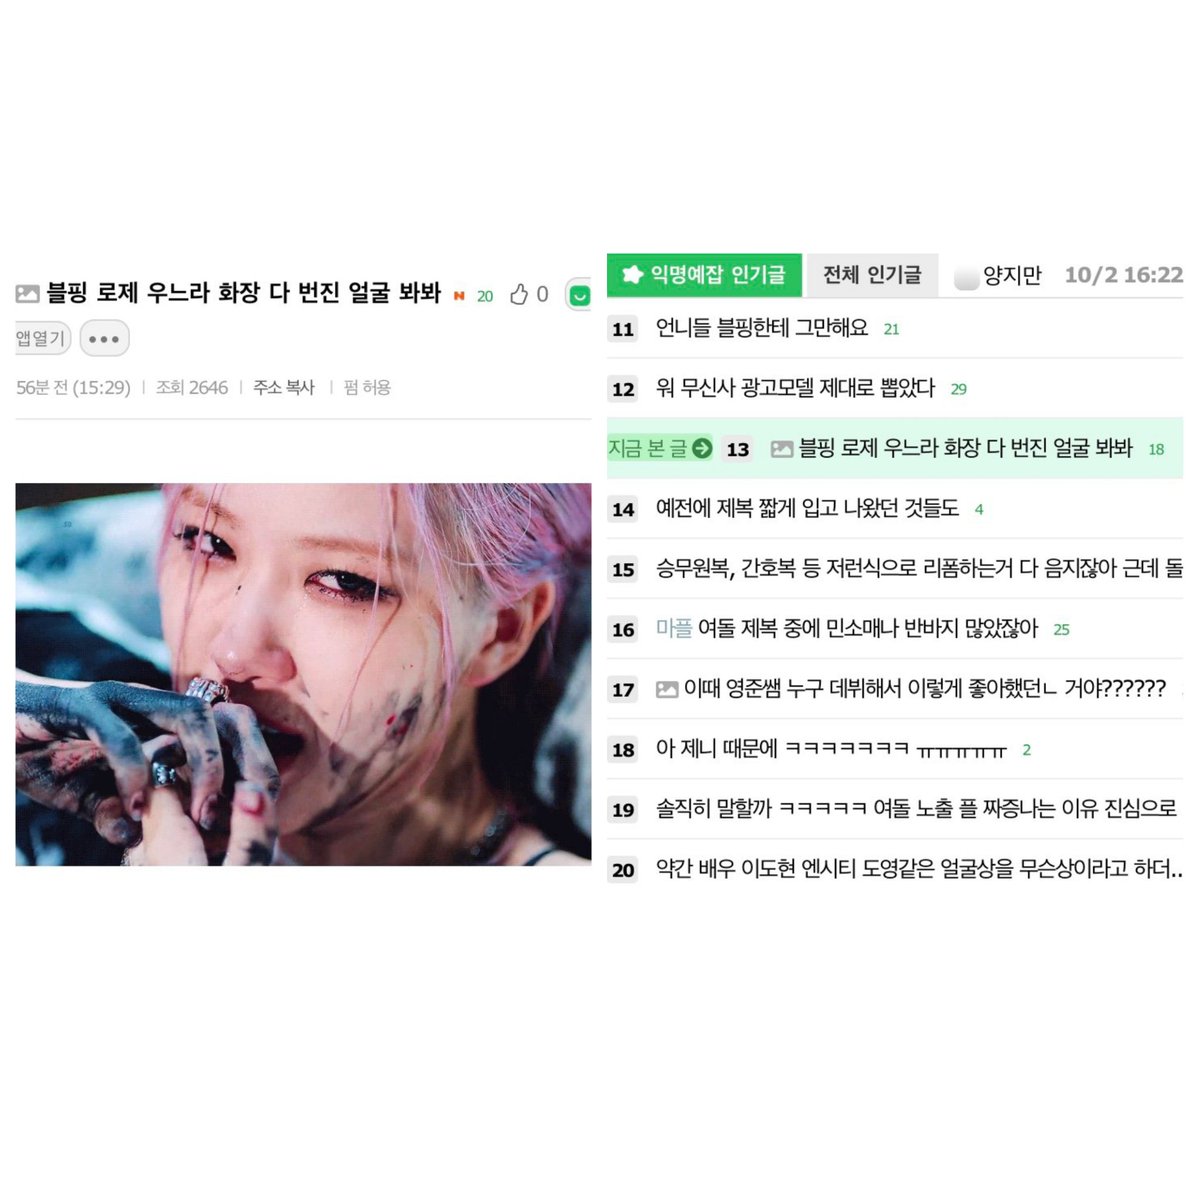 Rosé article also trended at Insitz #ROSÉ  #로제